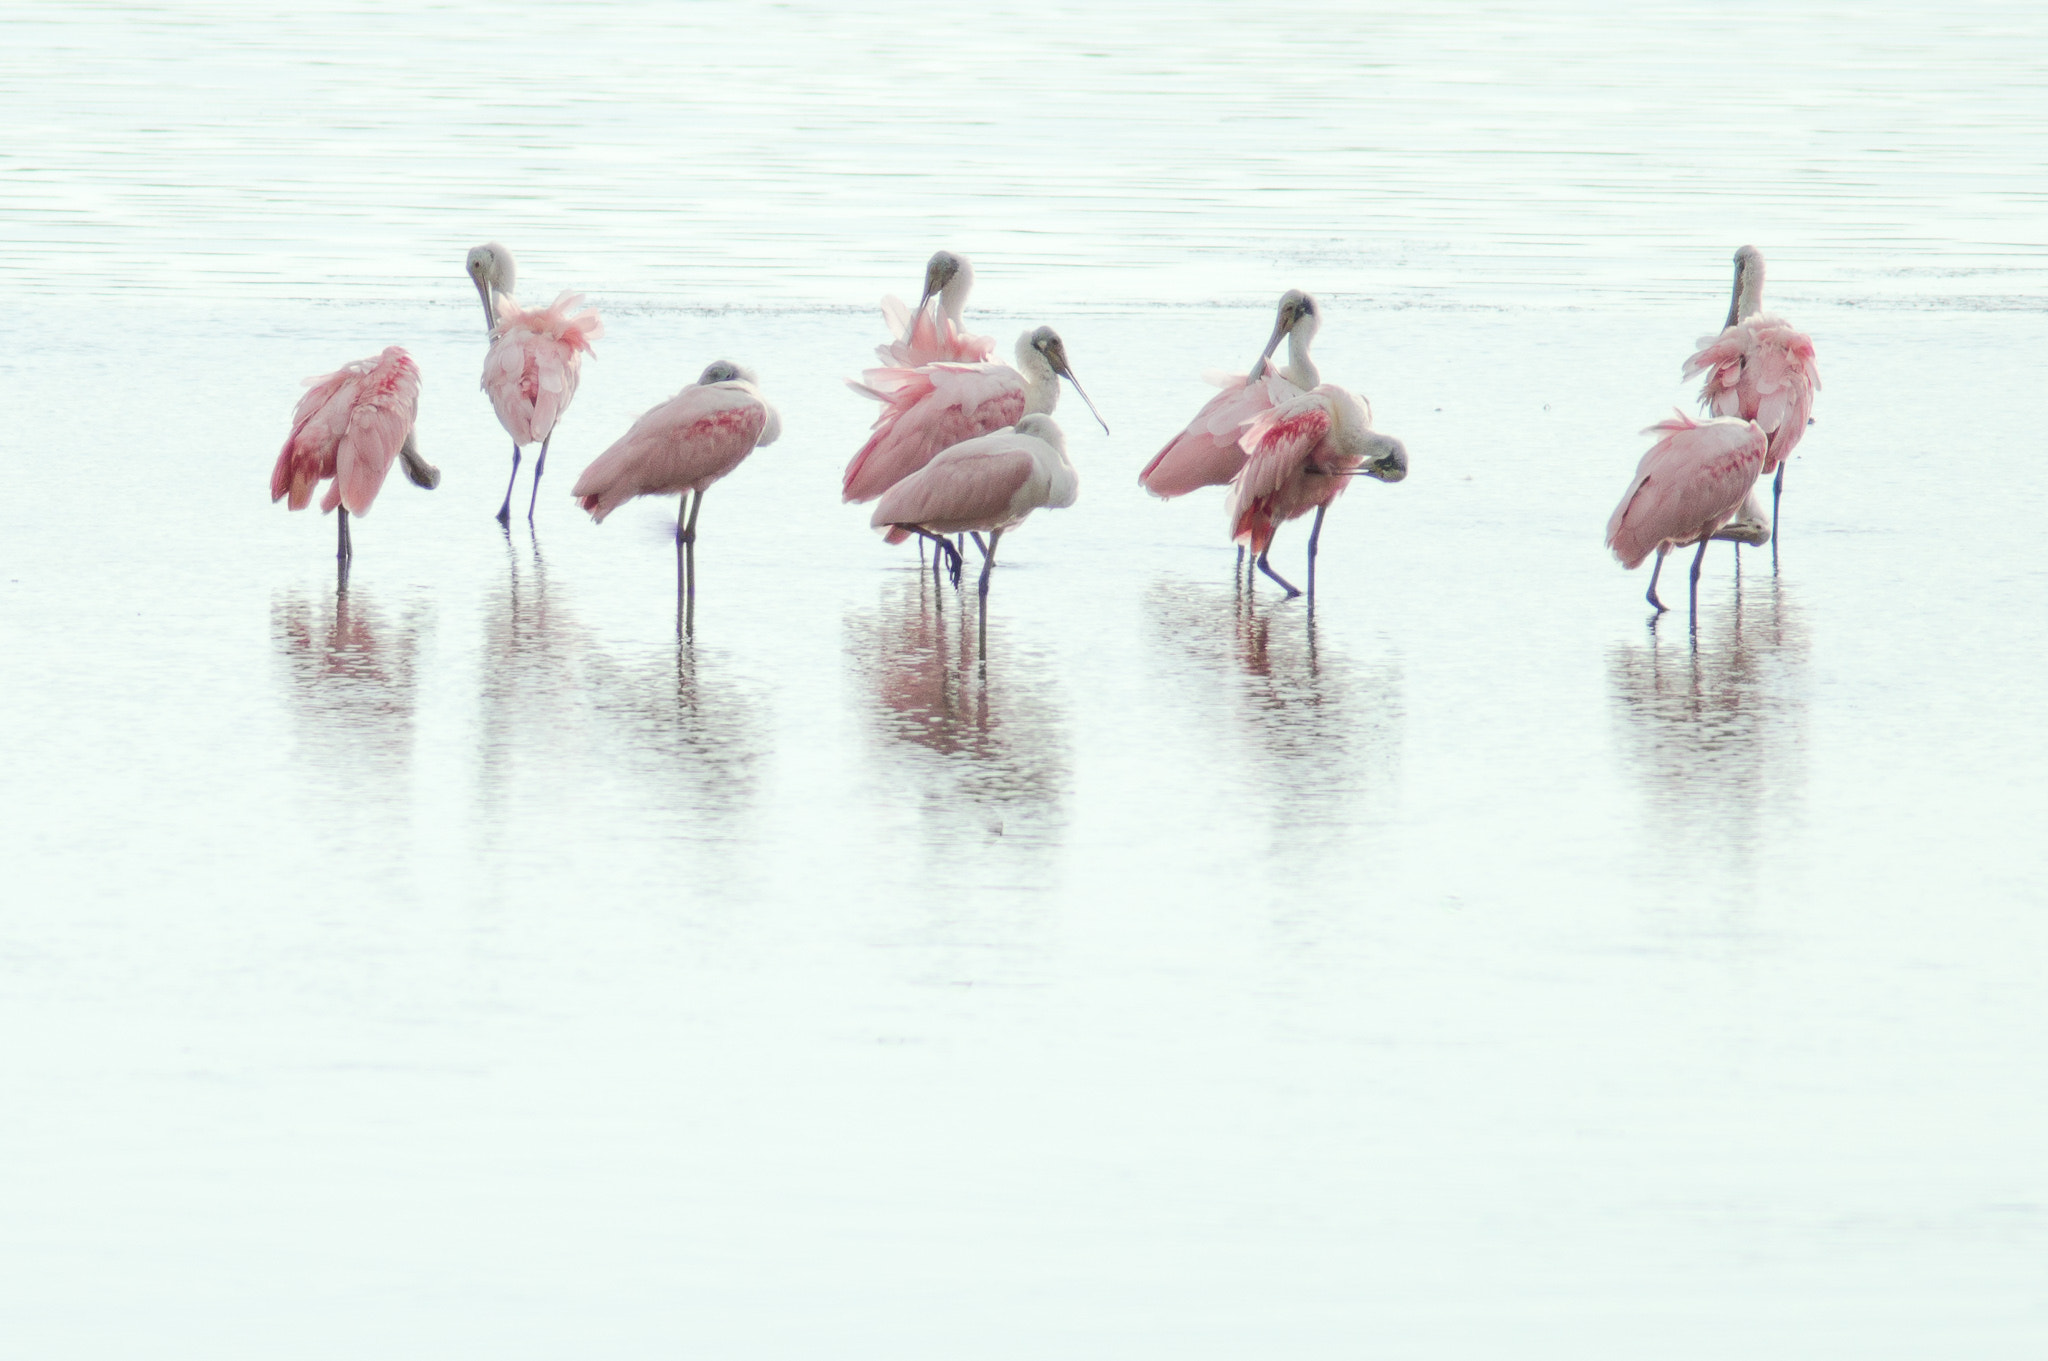 Sony SLT-A57 sample photo. A gathering of spoonbills photography